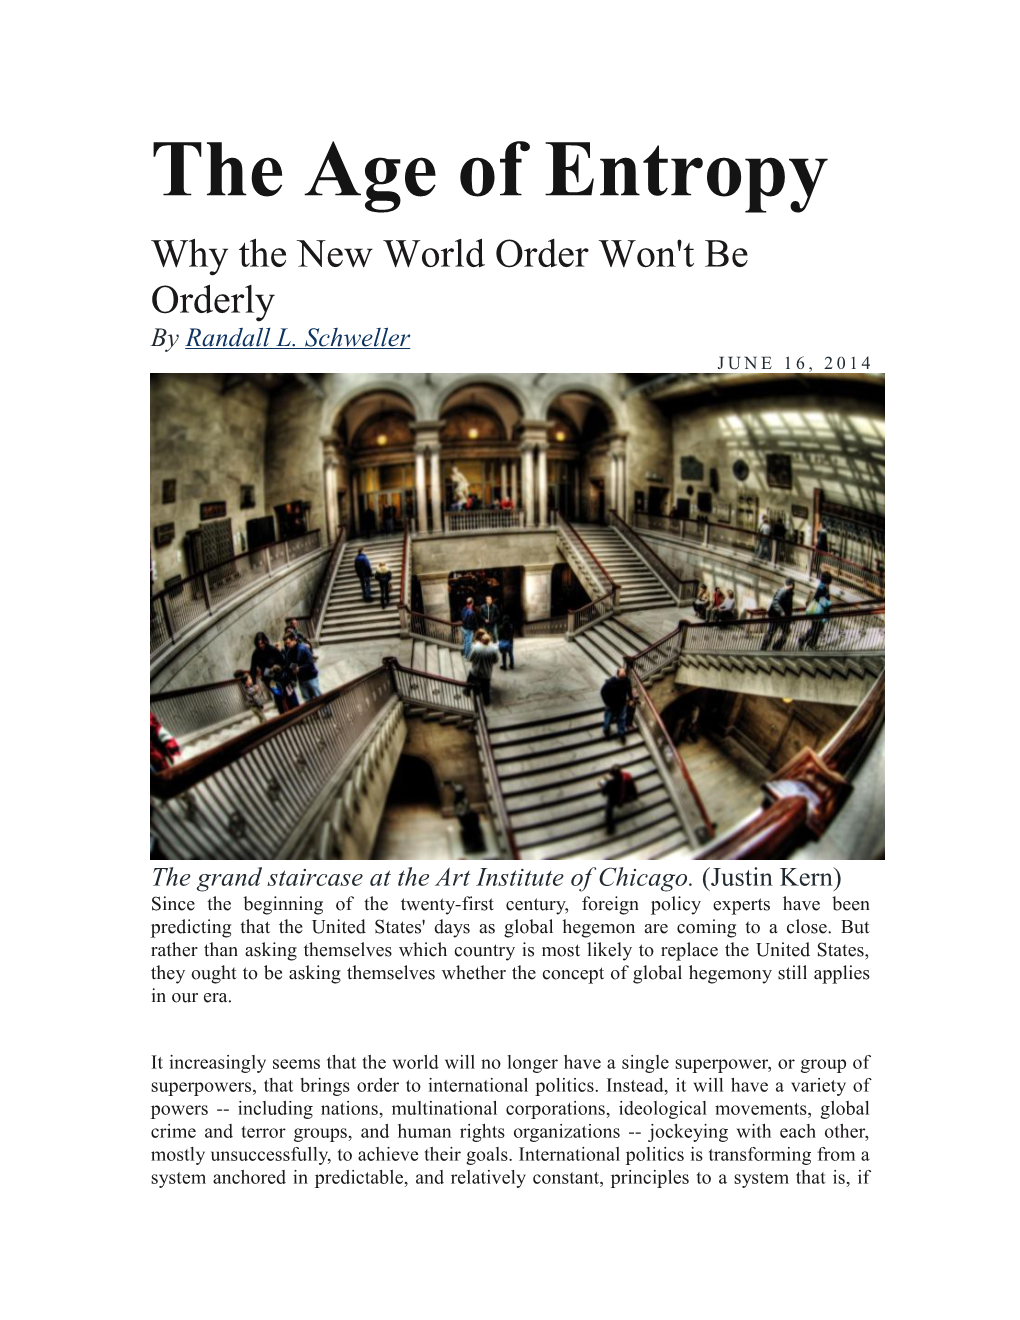 The Age of Entropy